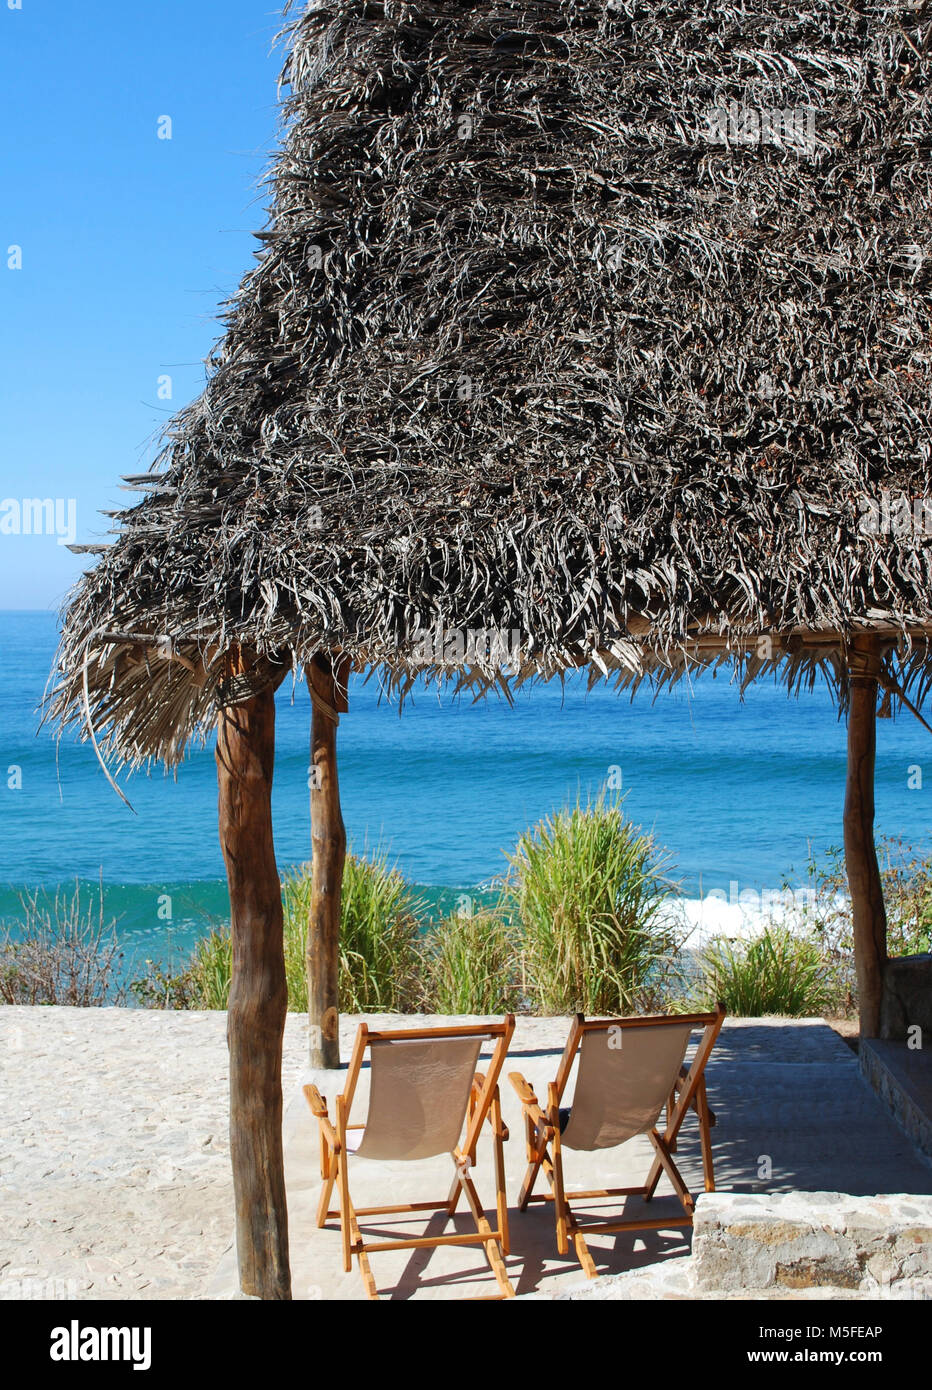 Under the Palapa - seating with a view to the sea Stock Photo